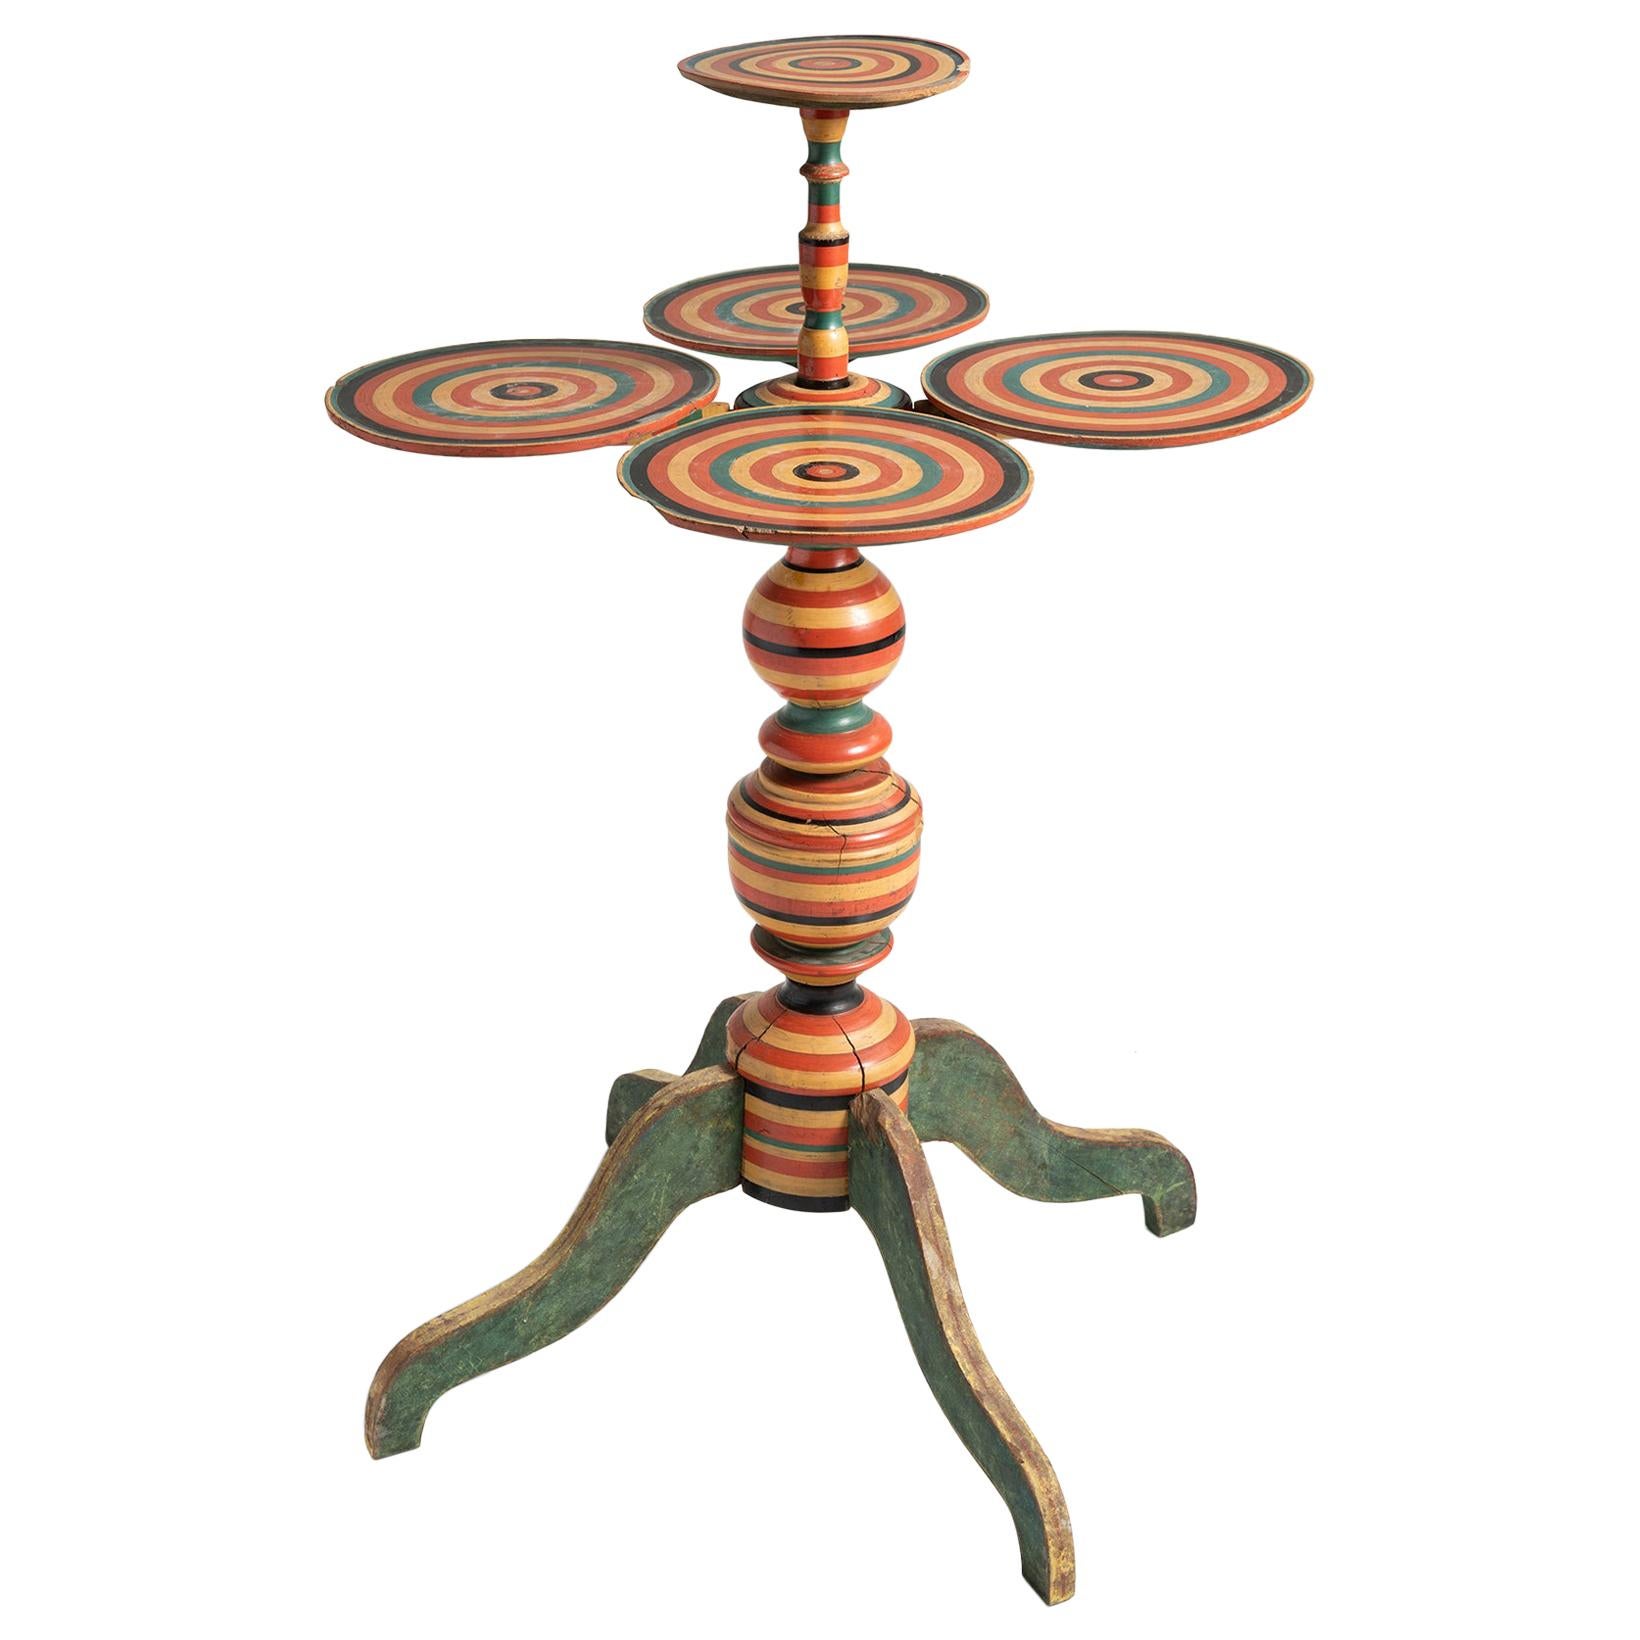 Colorful Occasional Table, Sweden, circa 1900